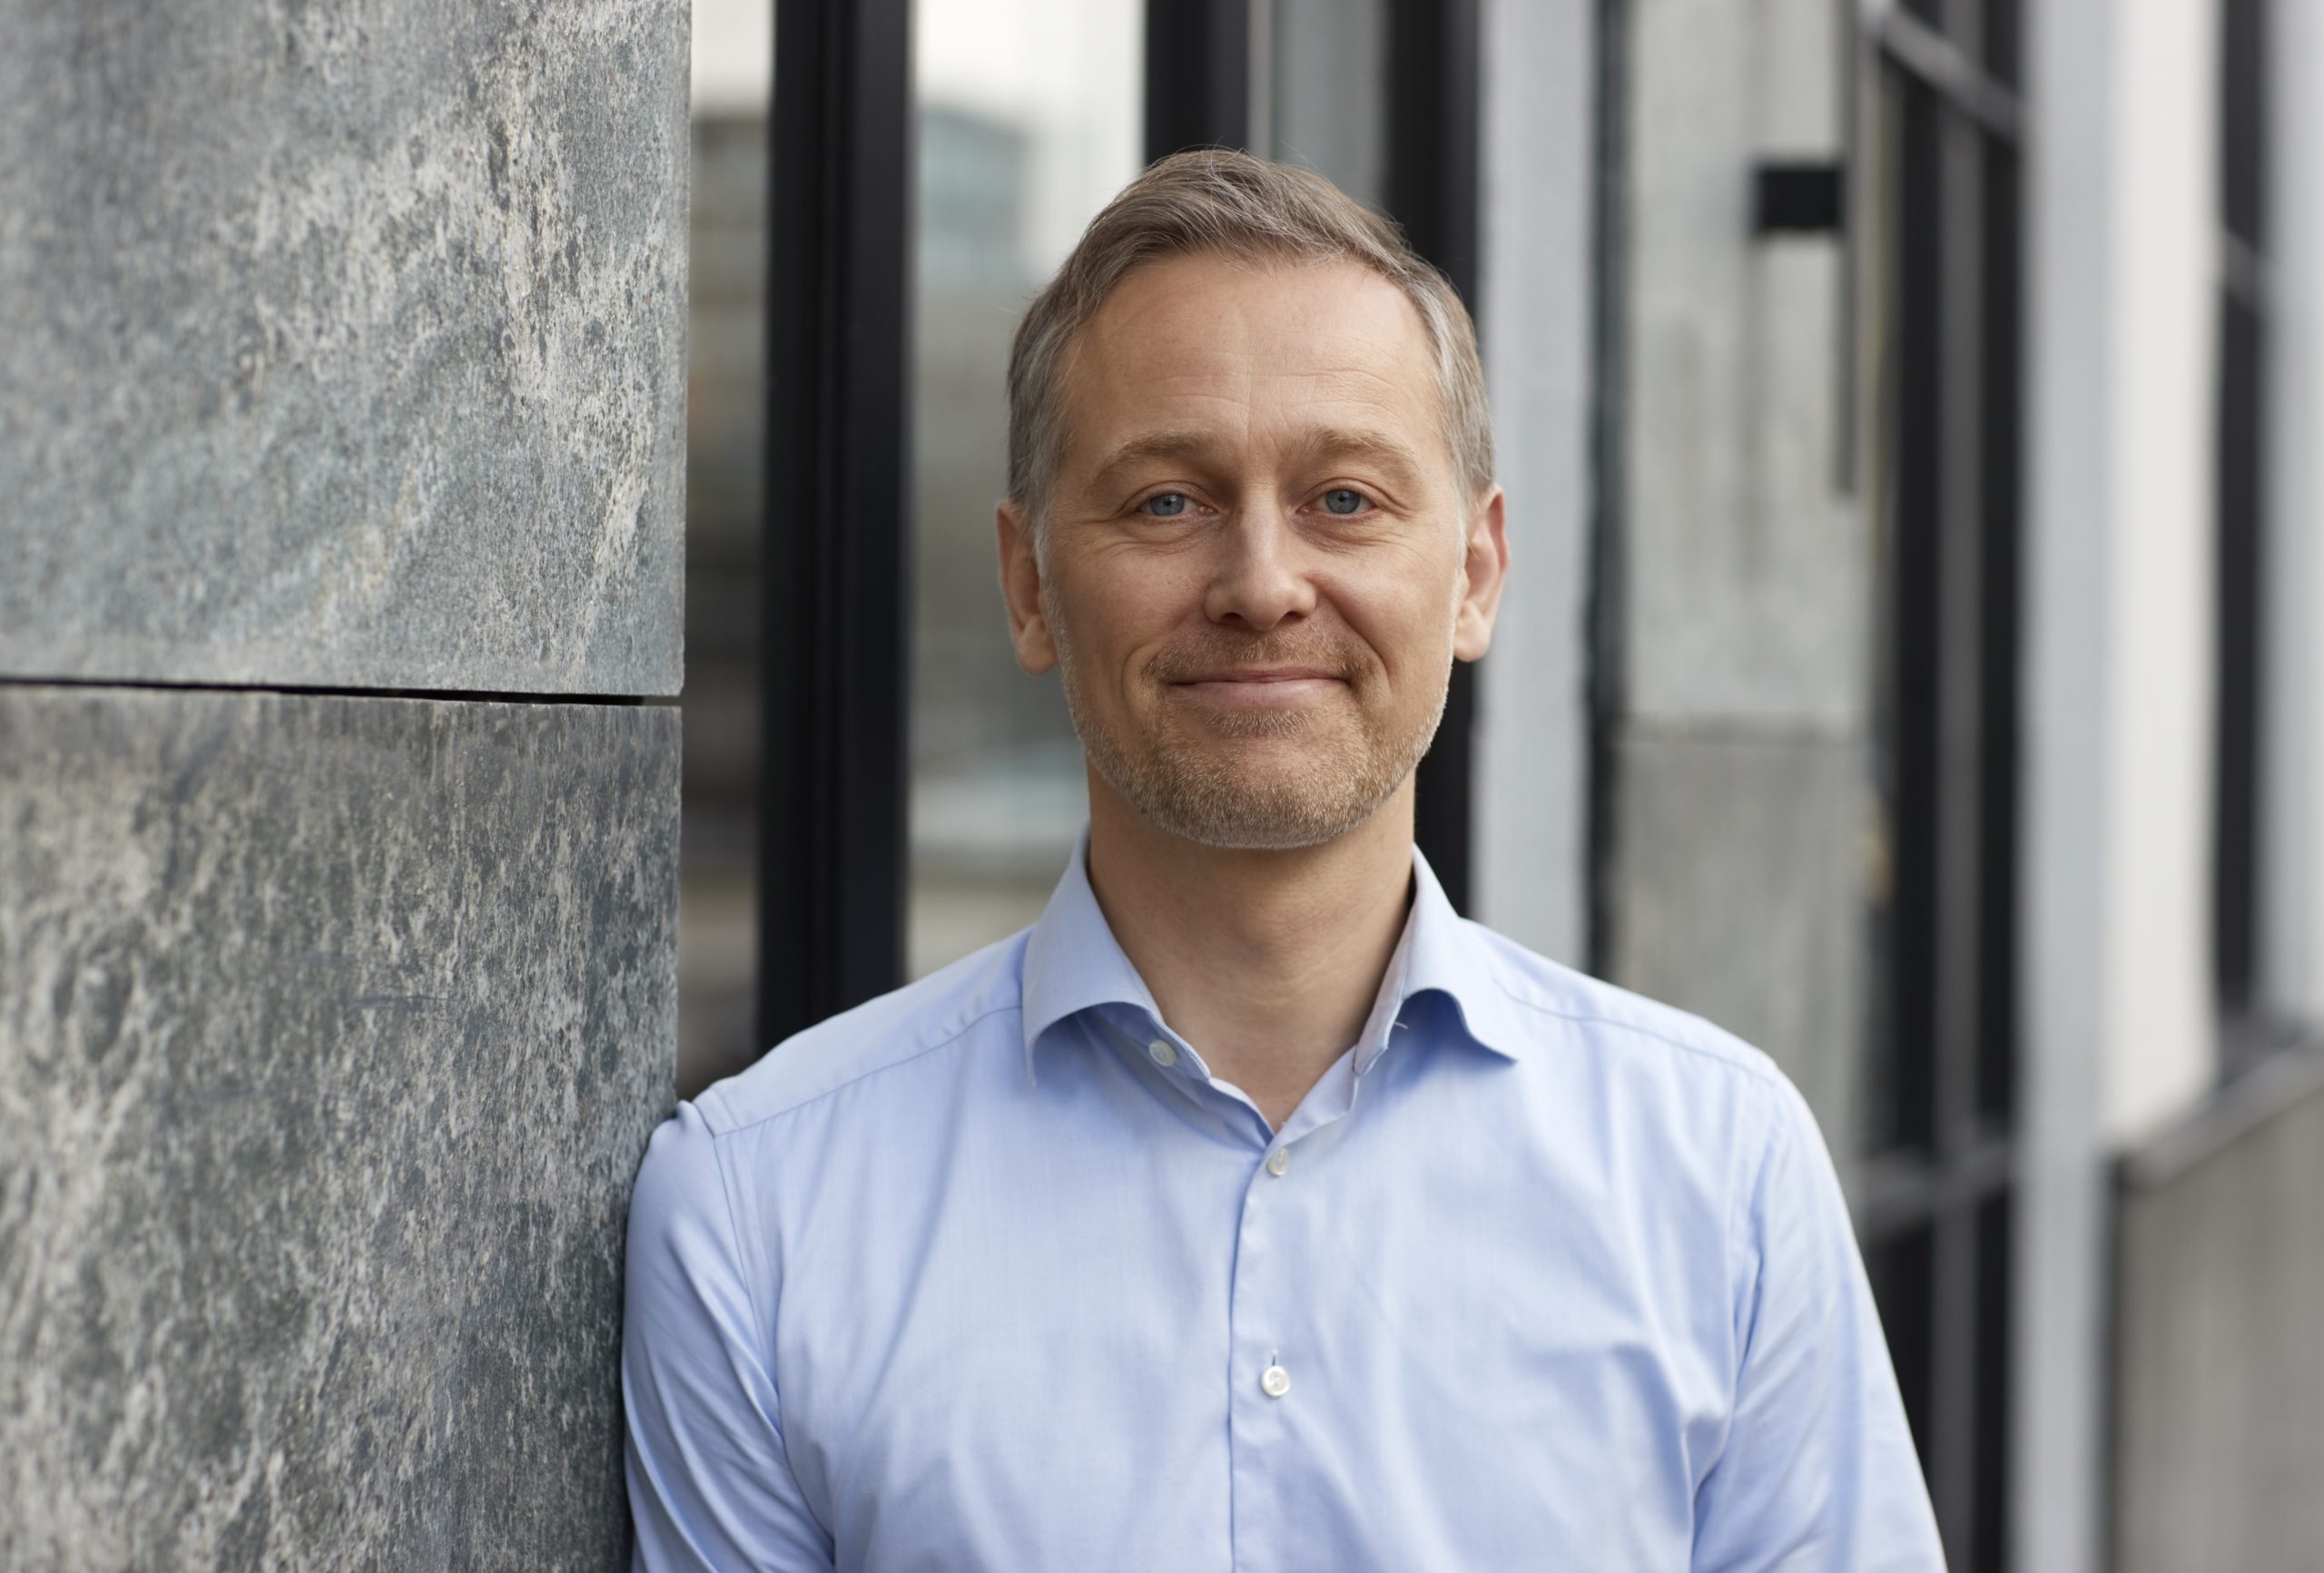 Incoming CEO Christian M. Ingerslev